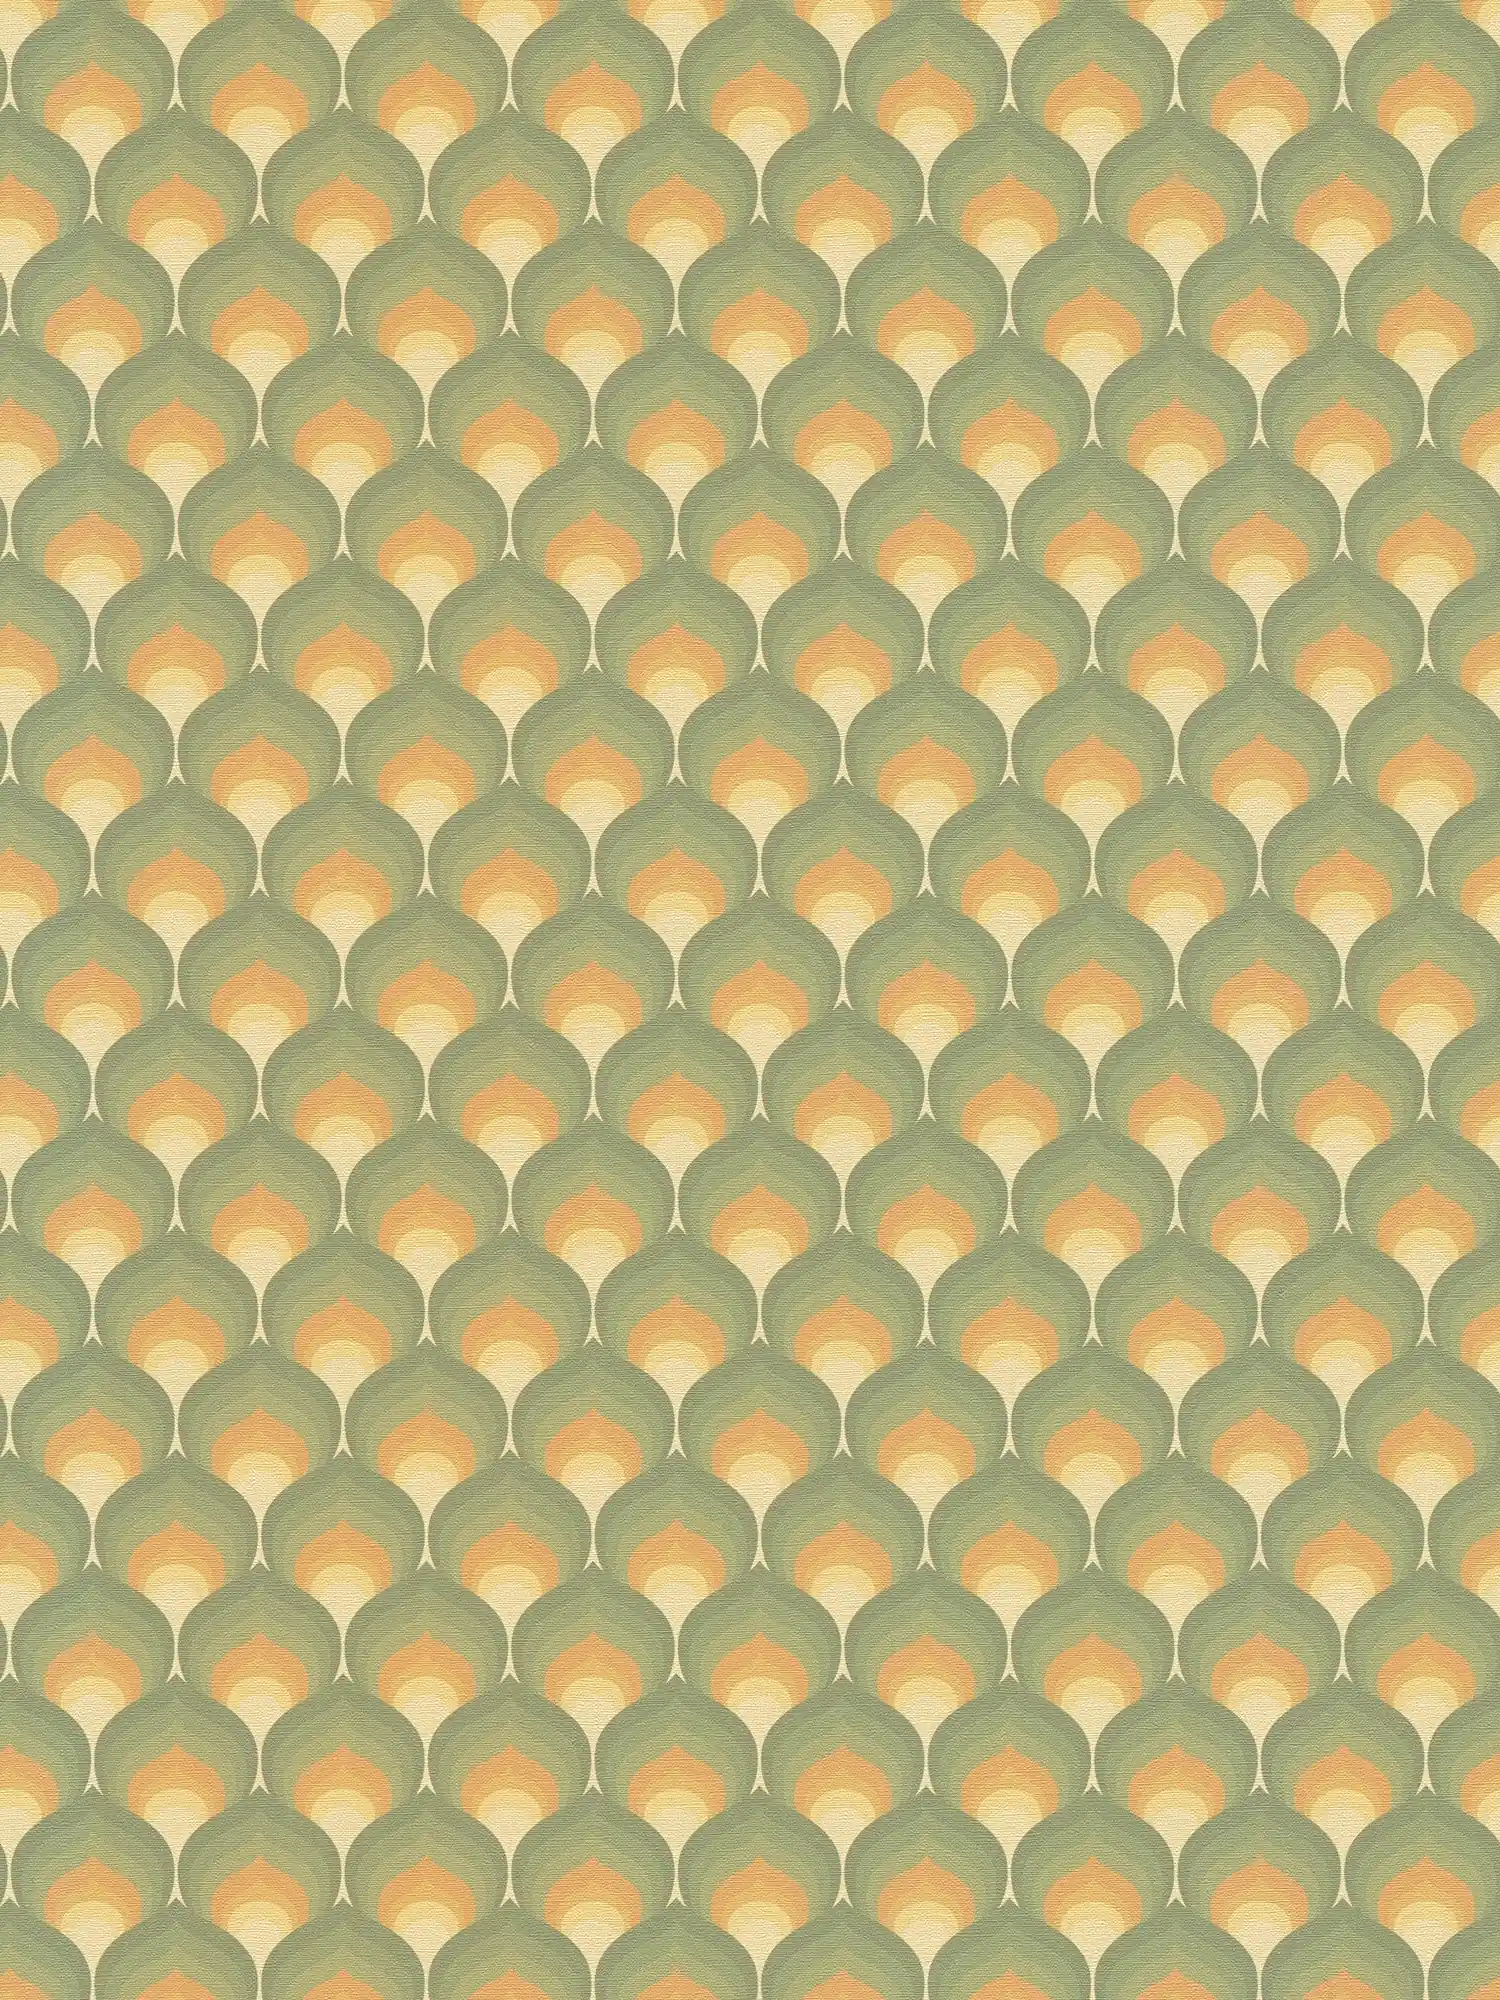 Retro style scaly pattern wallpaper - green, yellow, brown
